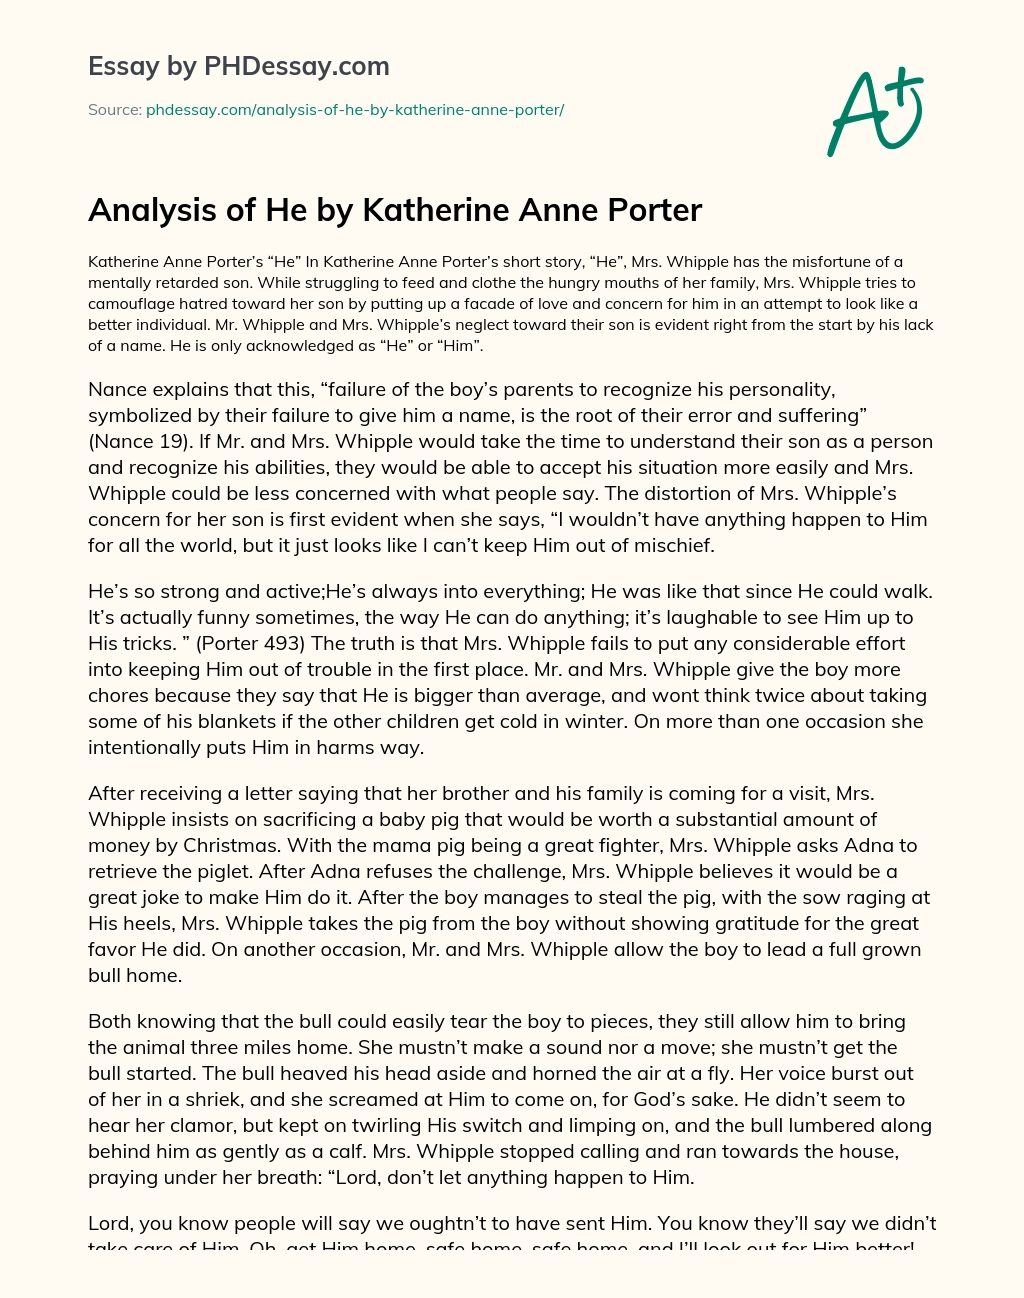 Analysis of He by Katherine Anne Porter essay